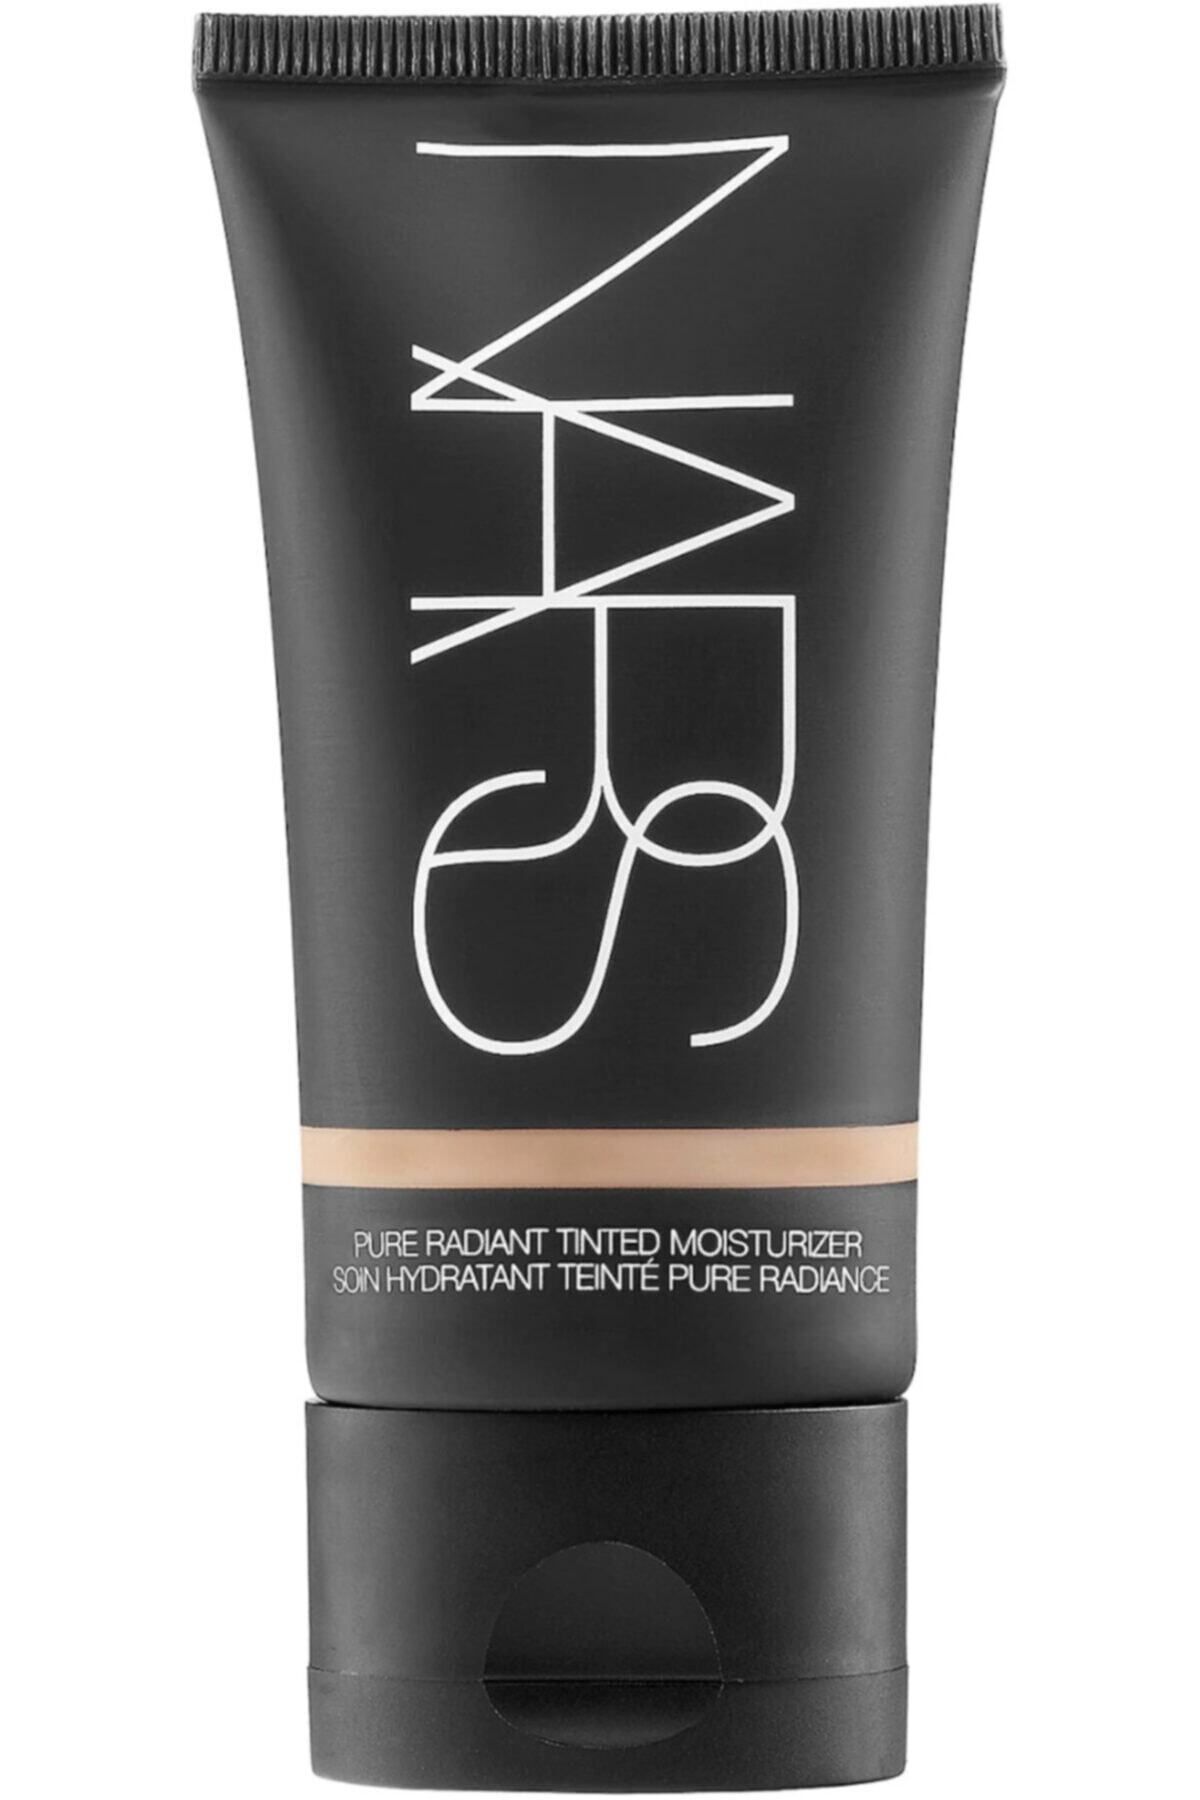 Nars Pure Radiant Tinted Moisturizer 56 ml-EFFECTIVE Shooting834